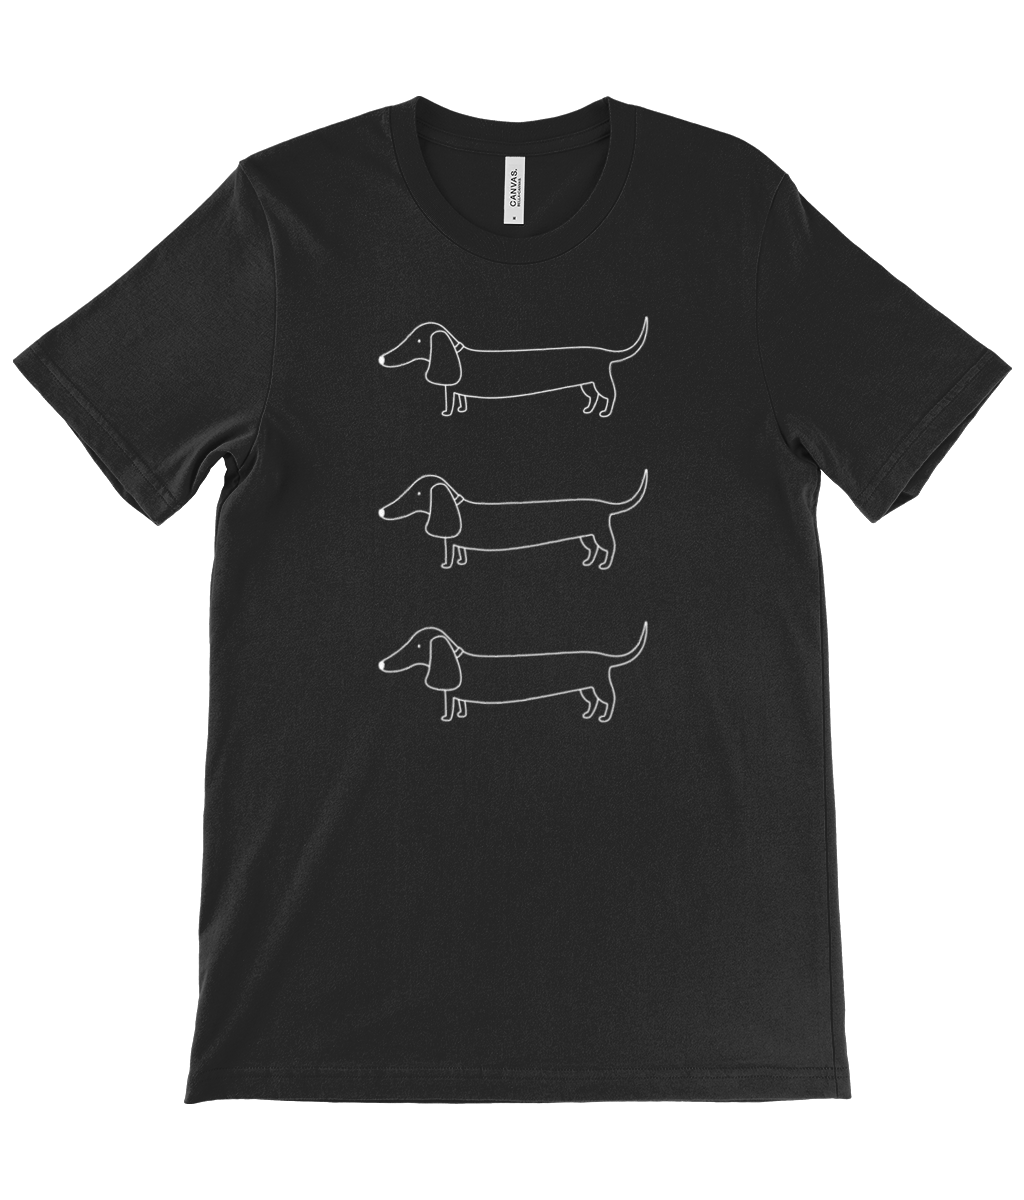 Black unisex t-shirt. Design on front shows 3 outline drawings of sausage dogs, in a column one above the other.